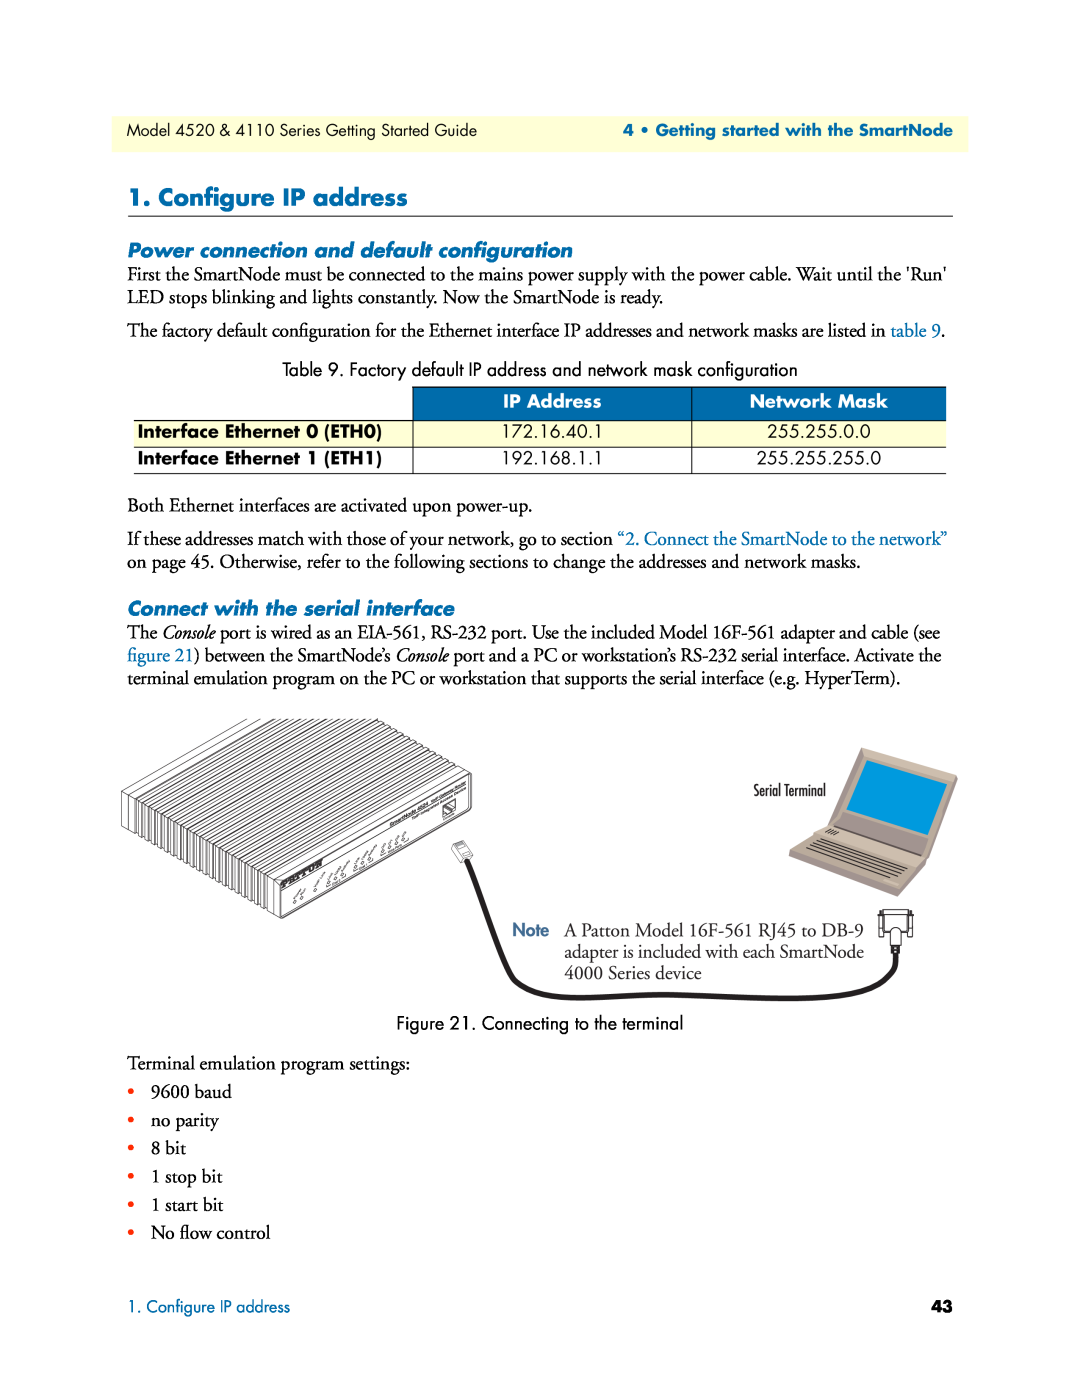 Patton electronic 4110 Conﬁgure IP address, Power connection and default conﬁguration, Connect with the serial interface 